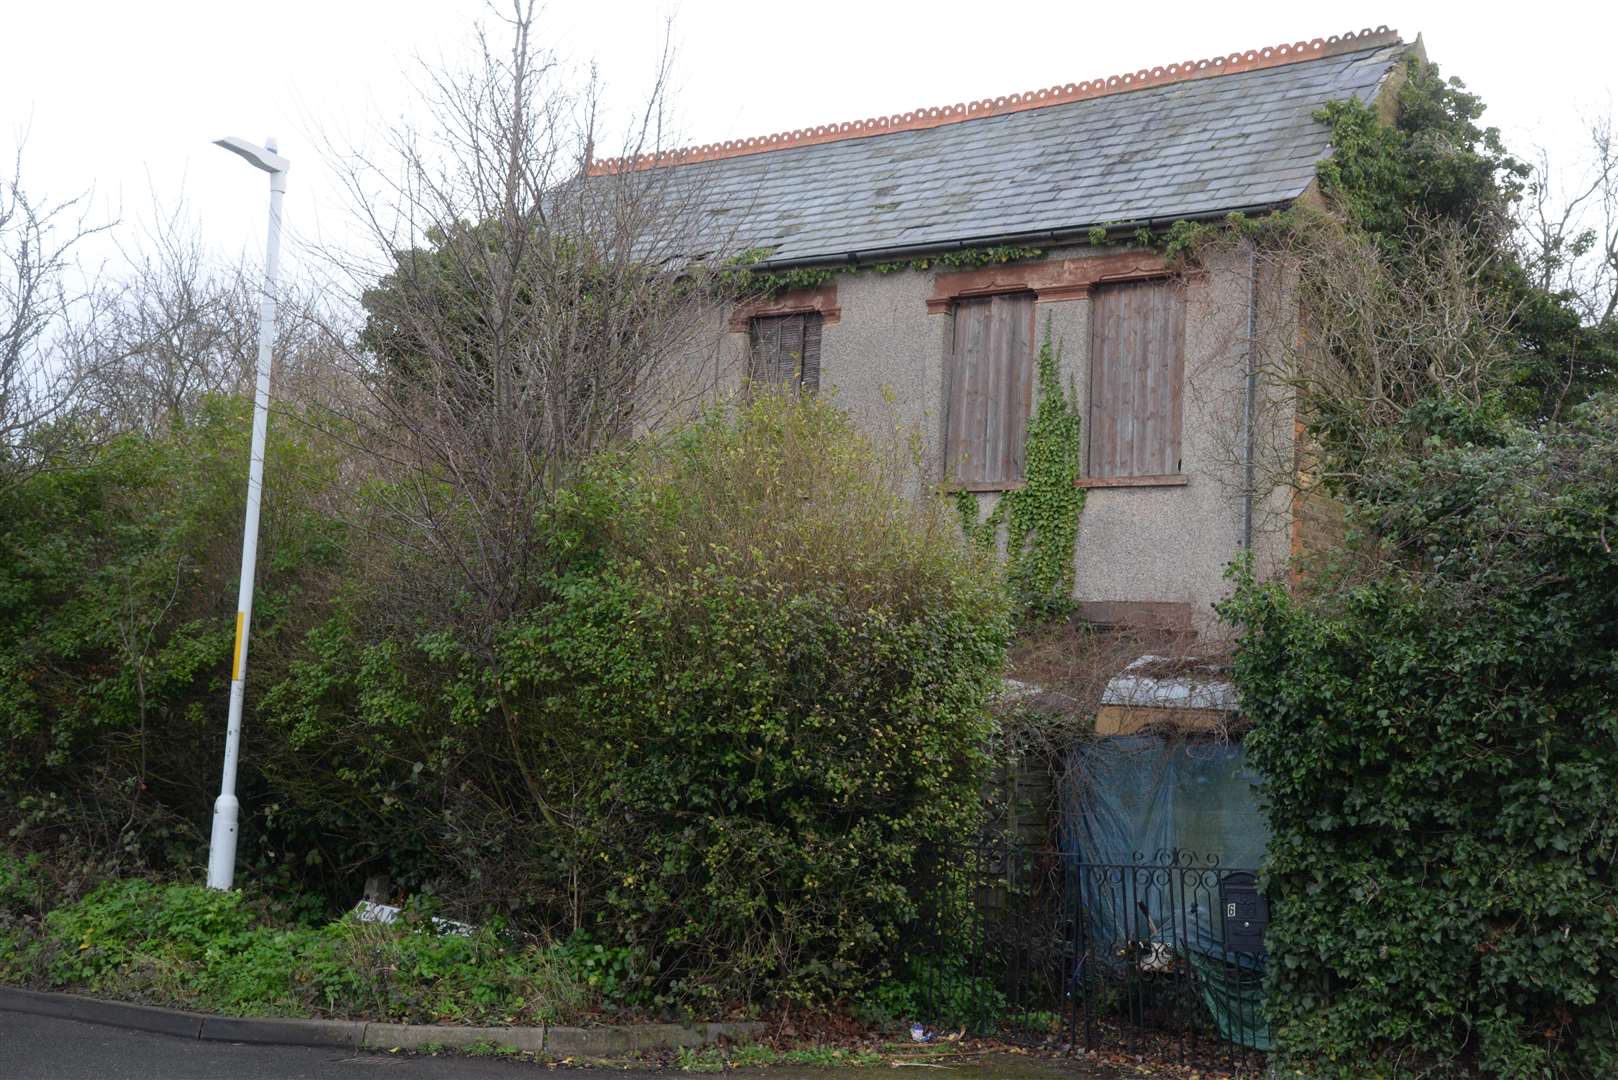 The property in Ham Shades Lane which has been derelict for 25 years. Picture: Chris Dave